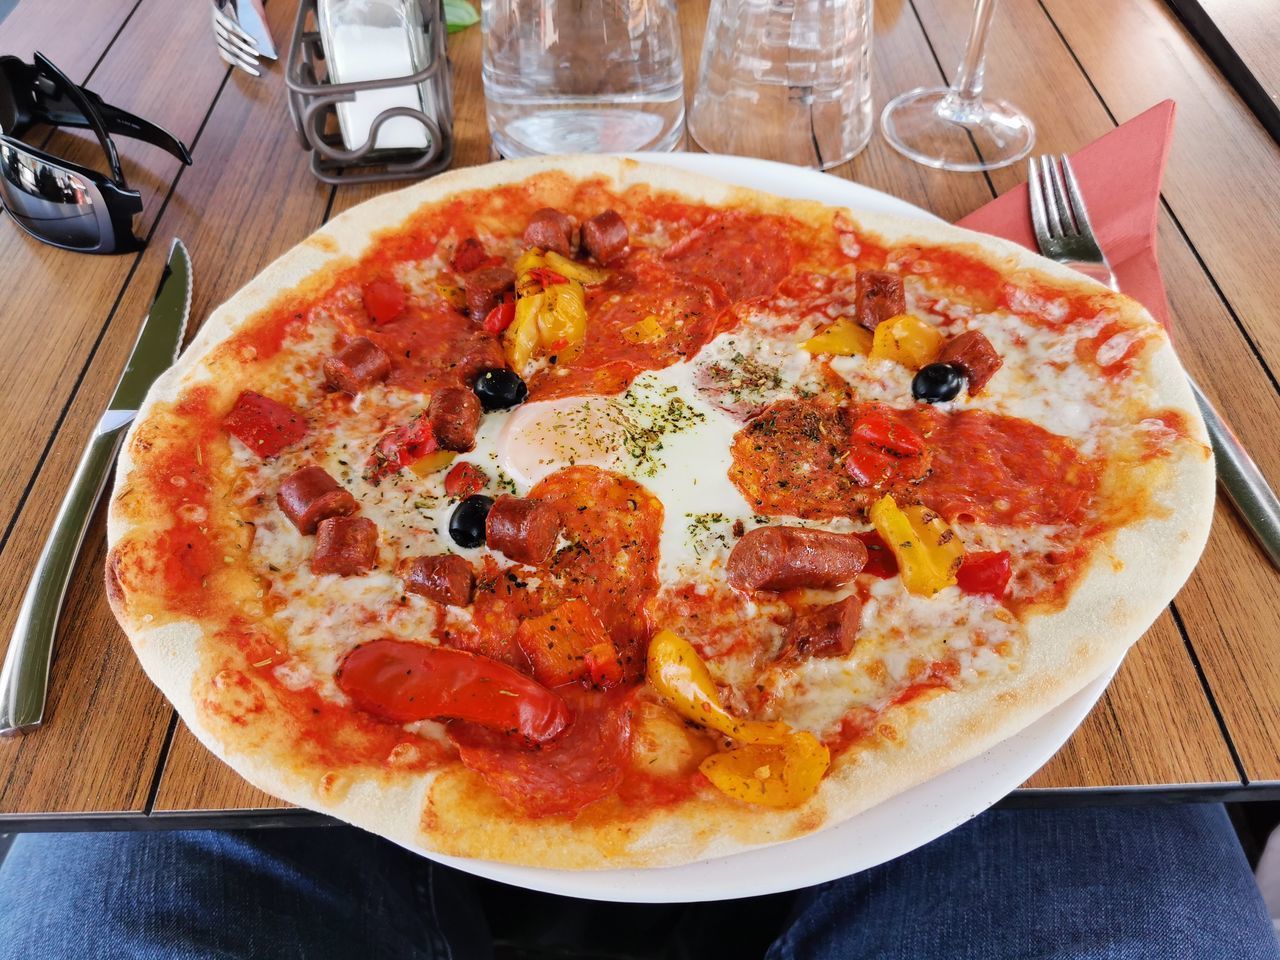 HIGH ANGLE VIEW OF PIZZA IN PLATE ON TABLE